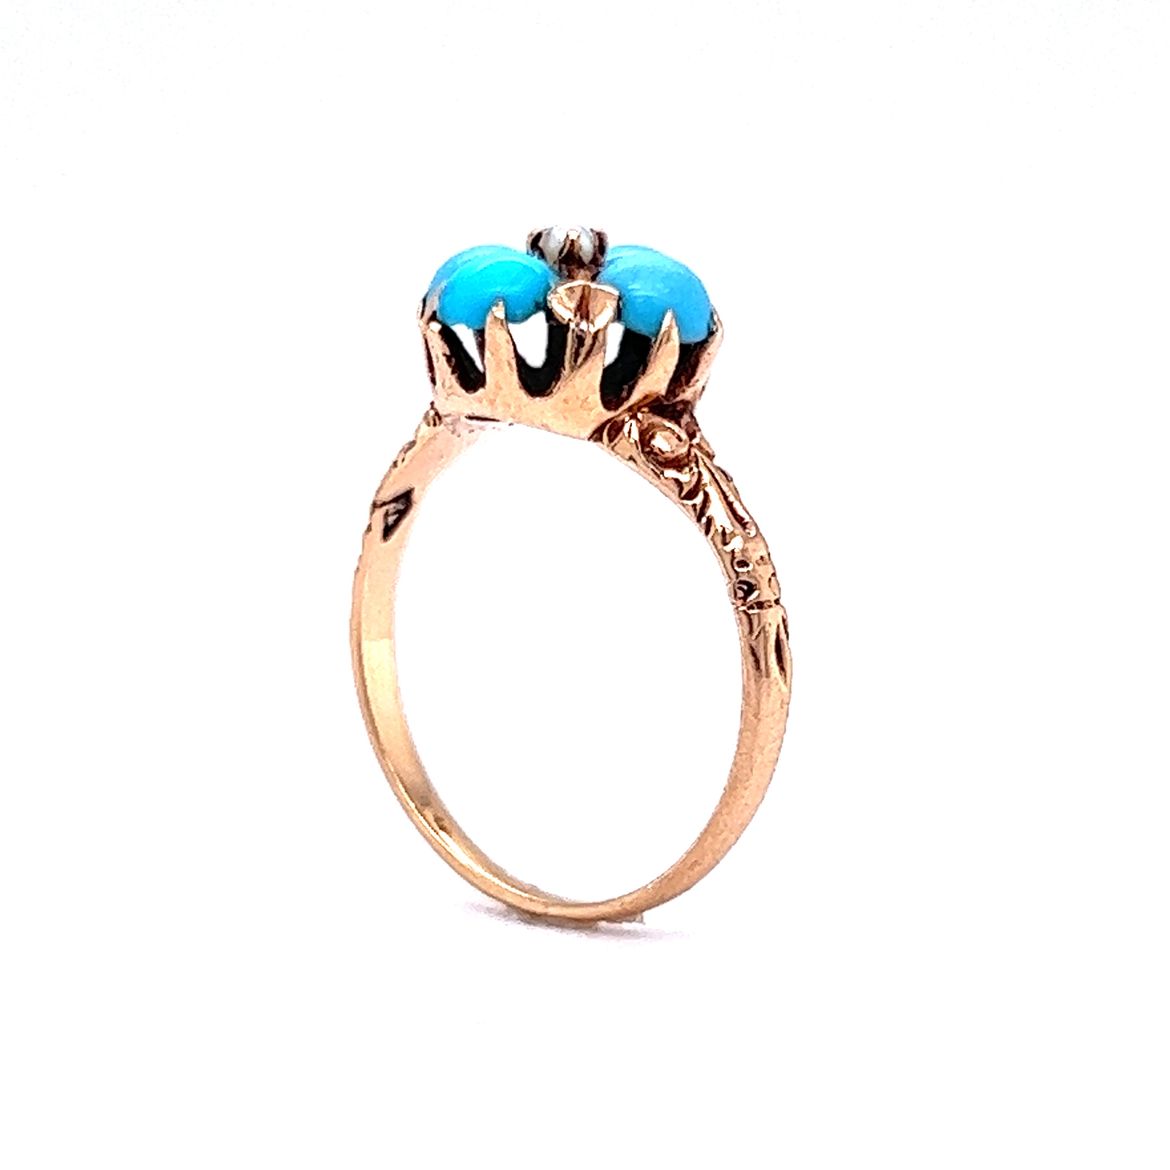 Victorian Turquoise & Pearl Cocktail Ring in 10k Gold